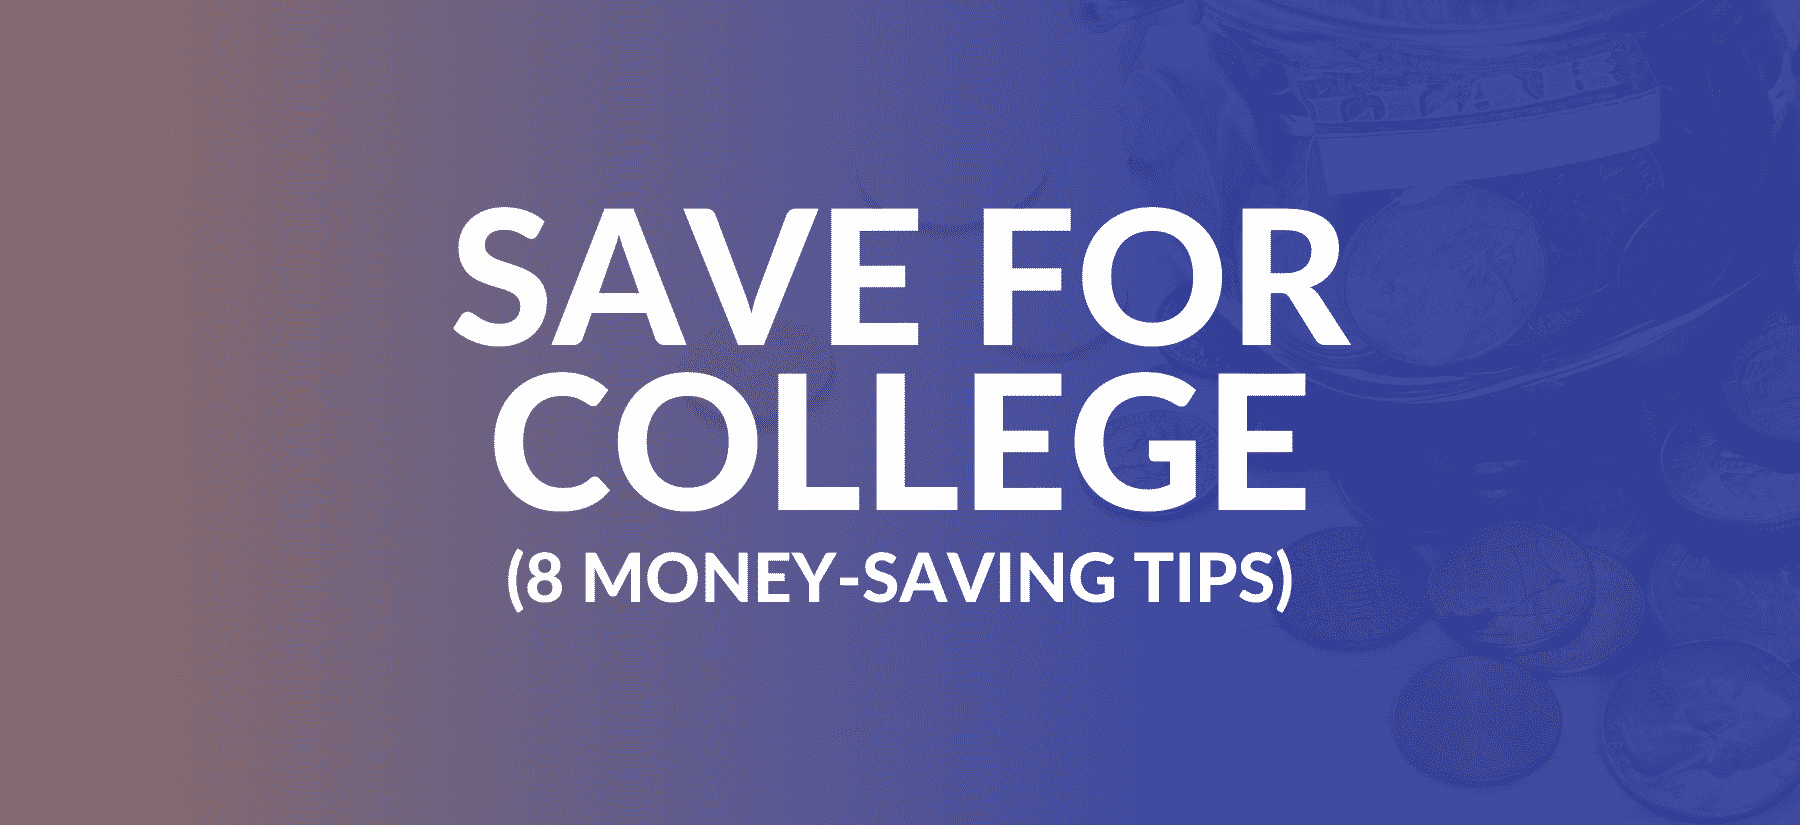 save-for-college-money-saving-tips